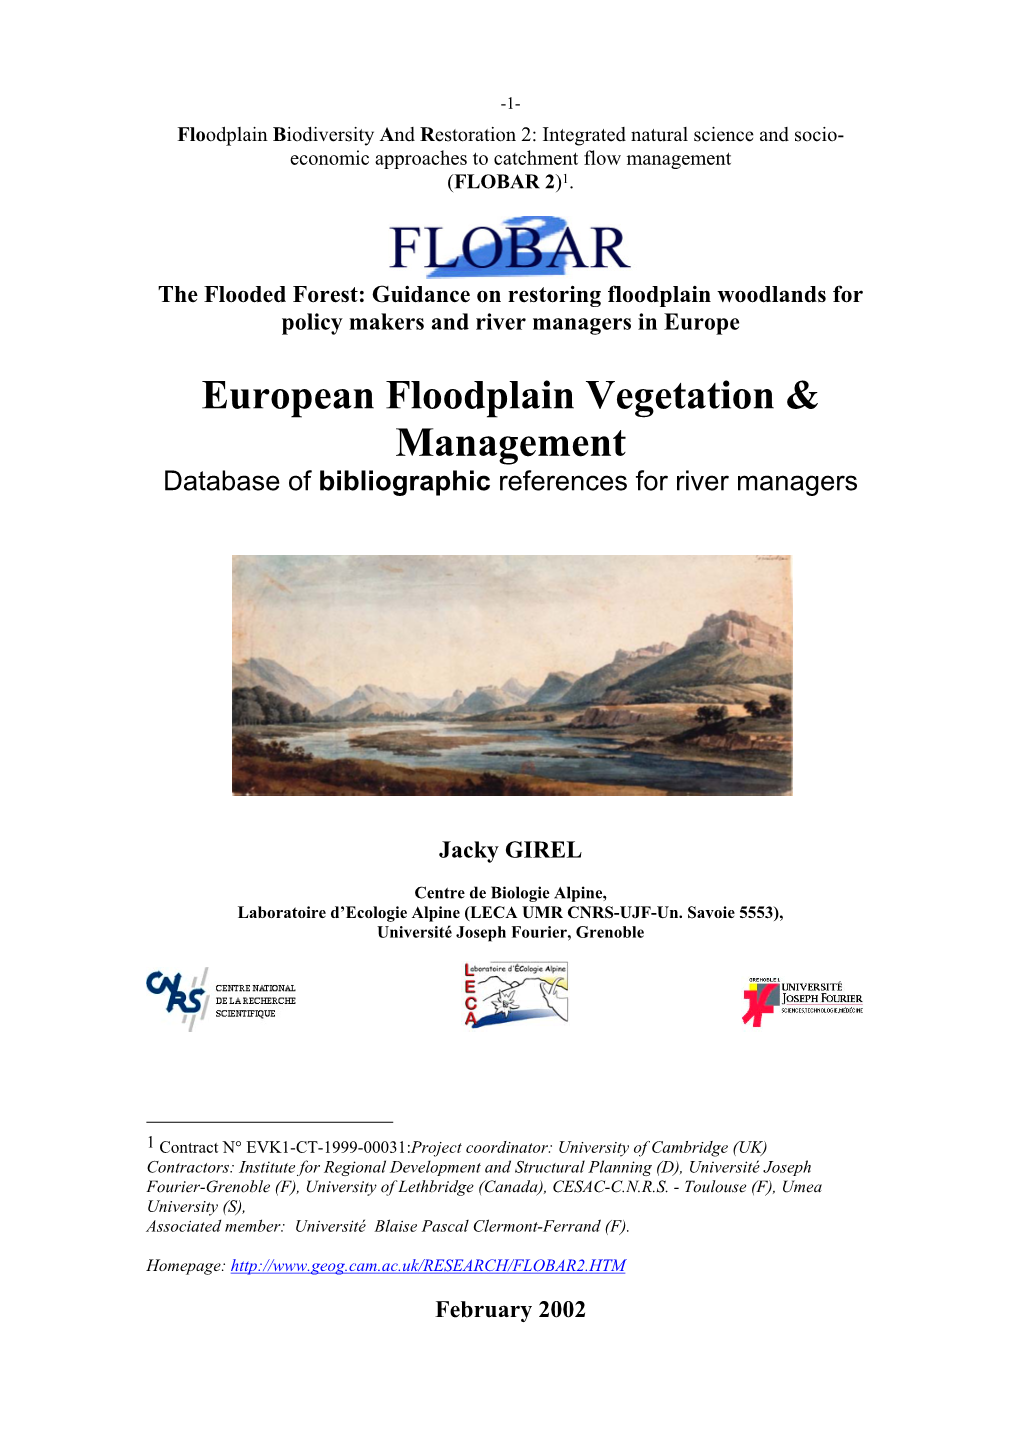 Floodplain Biodiversity and Restoration 2: Integrated Natural Science and Socio- Economic Approaches to Catchment Flow Management (FLOBAR 2)1